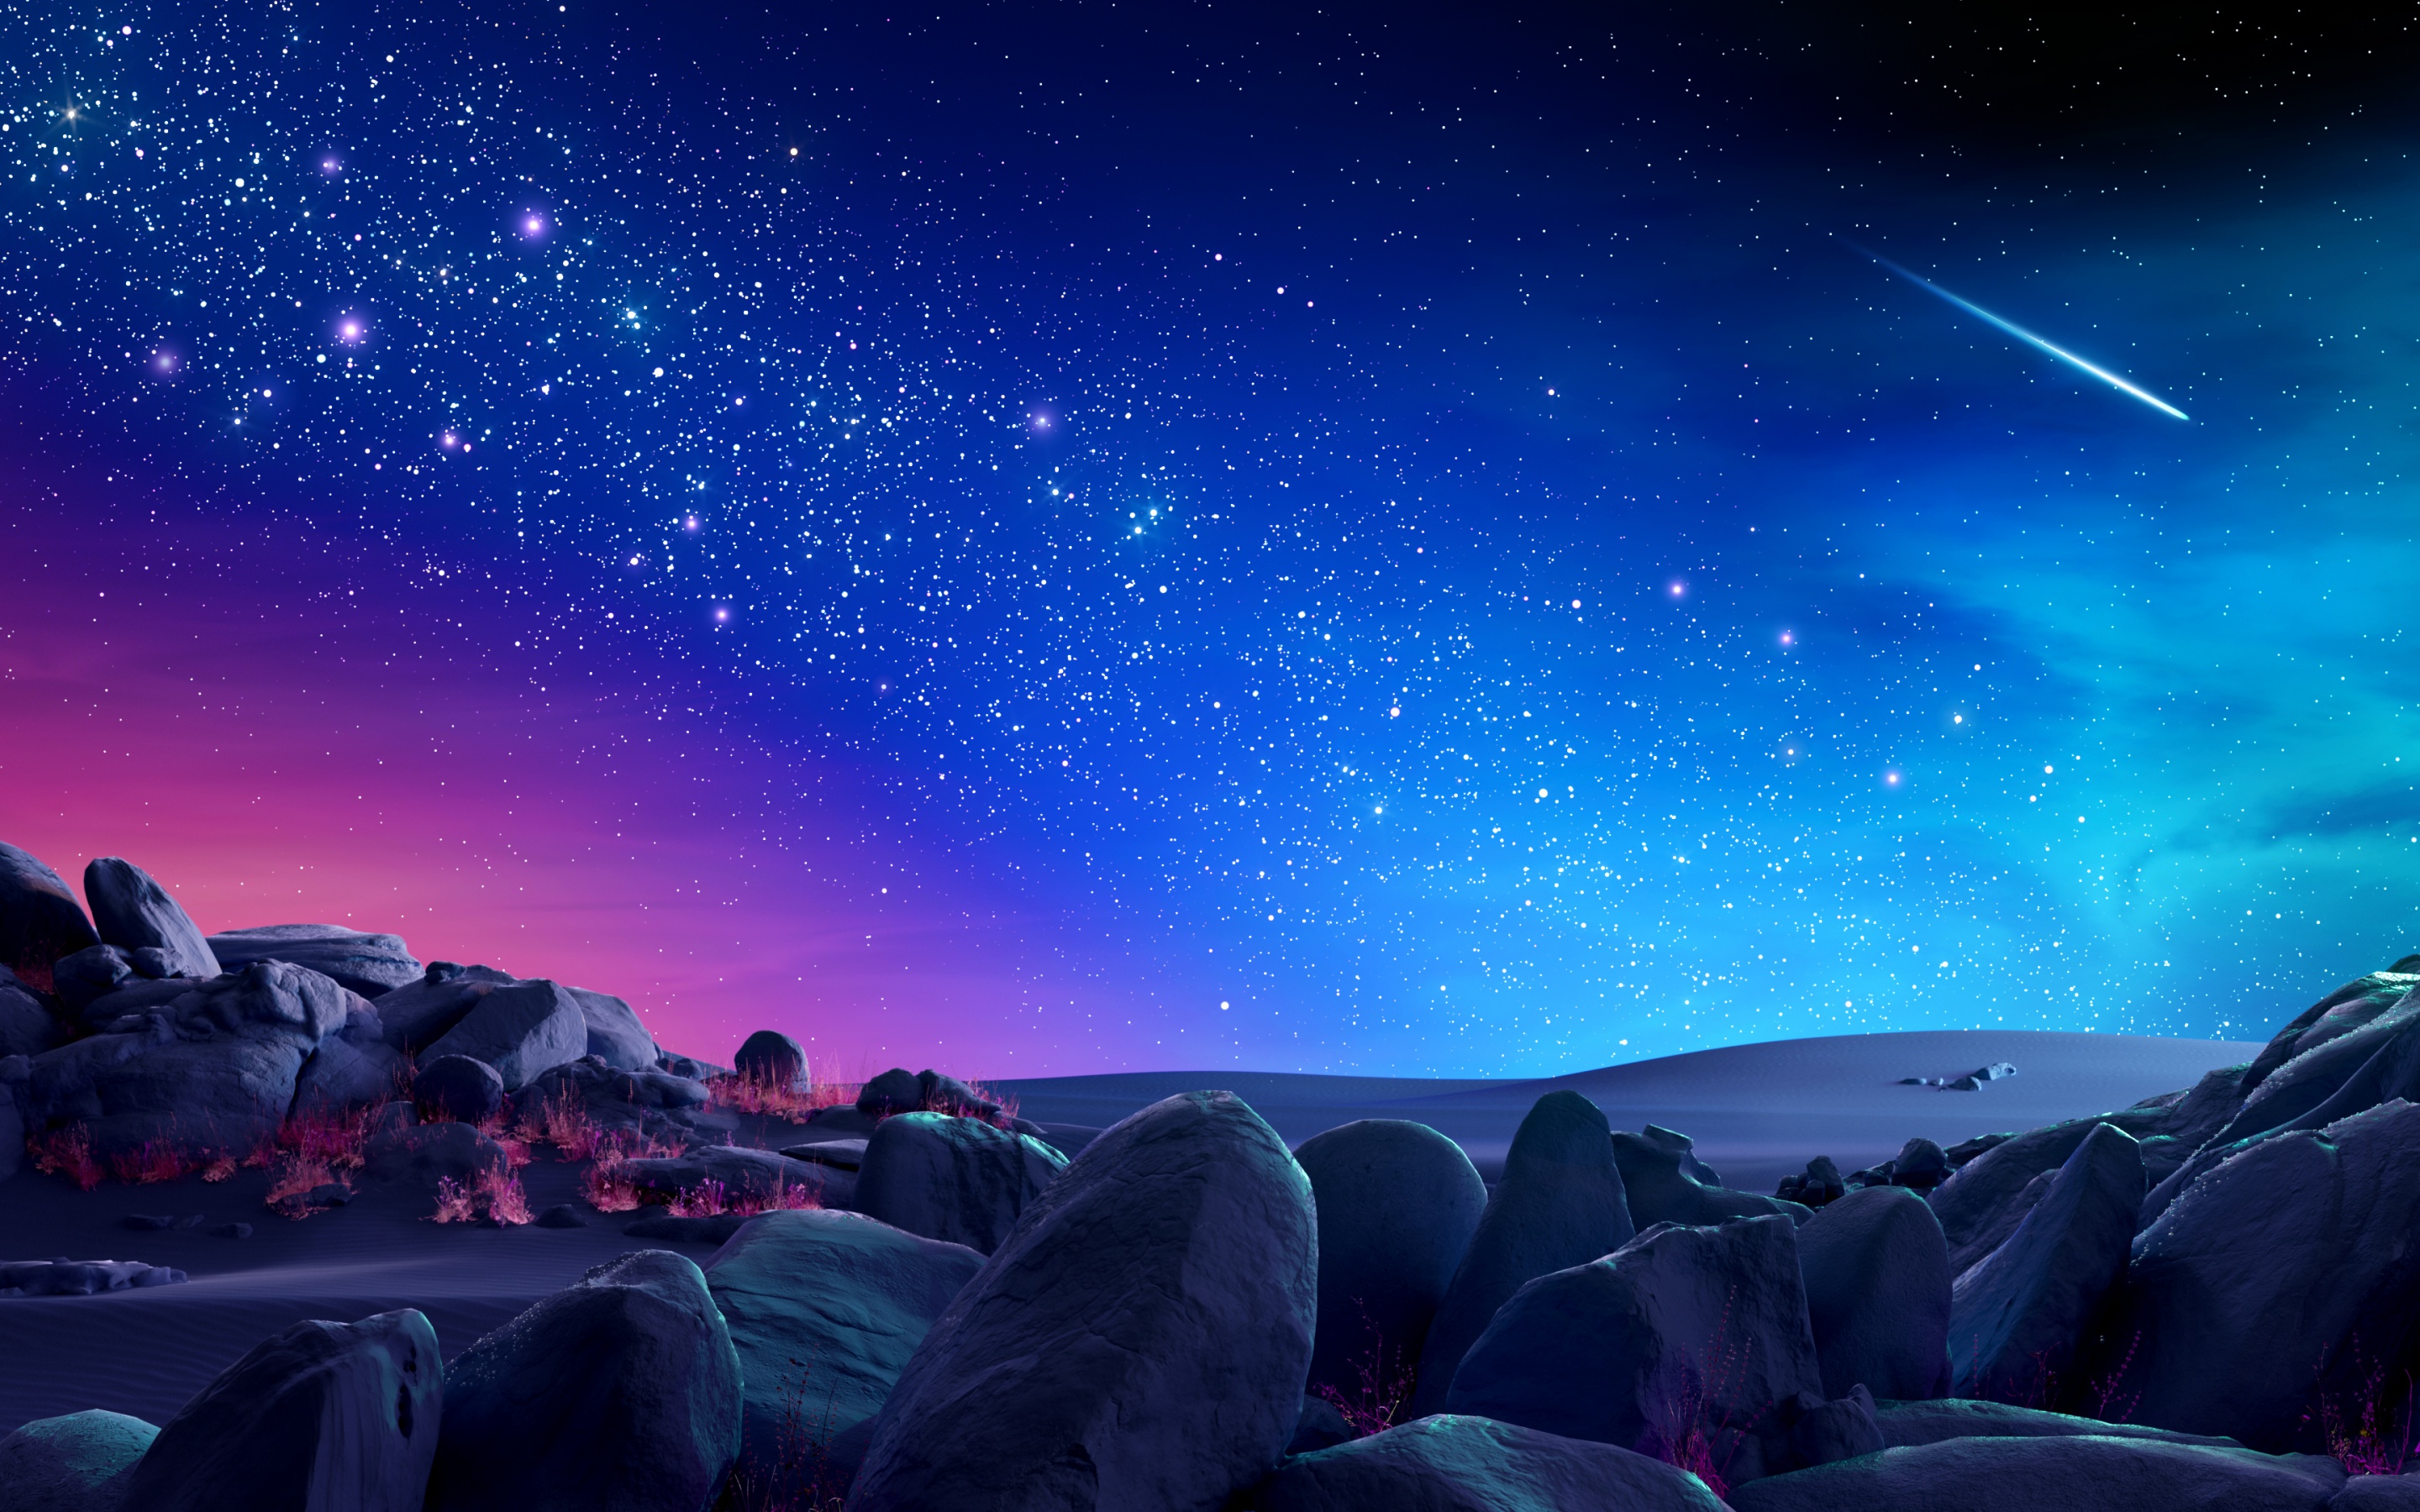 https://4kwallpapers.com/images/wallpapers/night-sky-colorful-2880x1800-12510.jpg